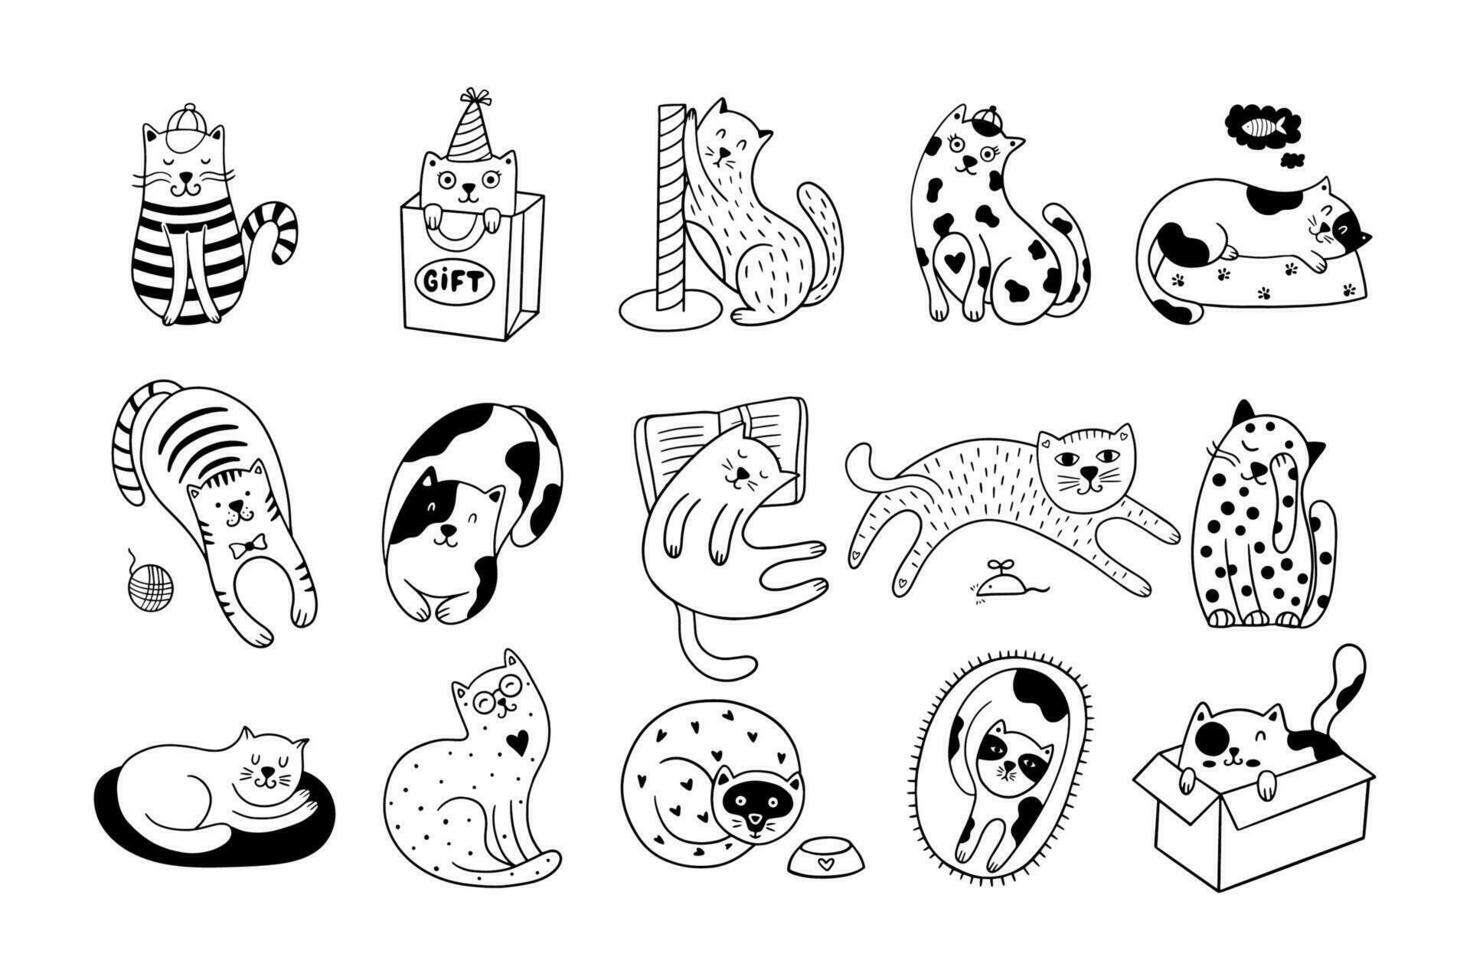 Set of 15 cute hand-drawn cats vector